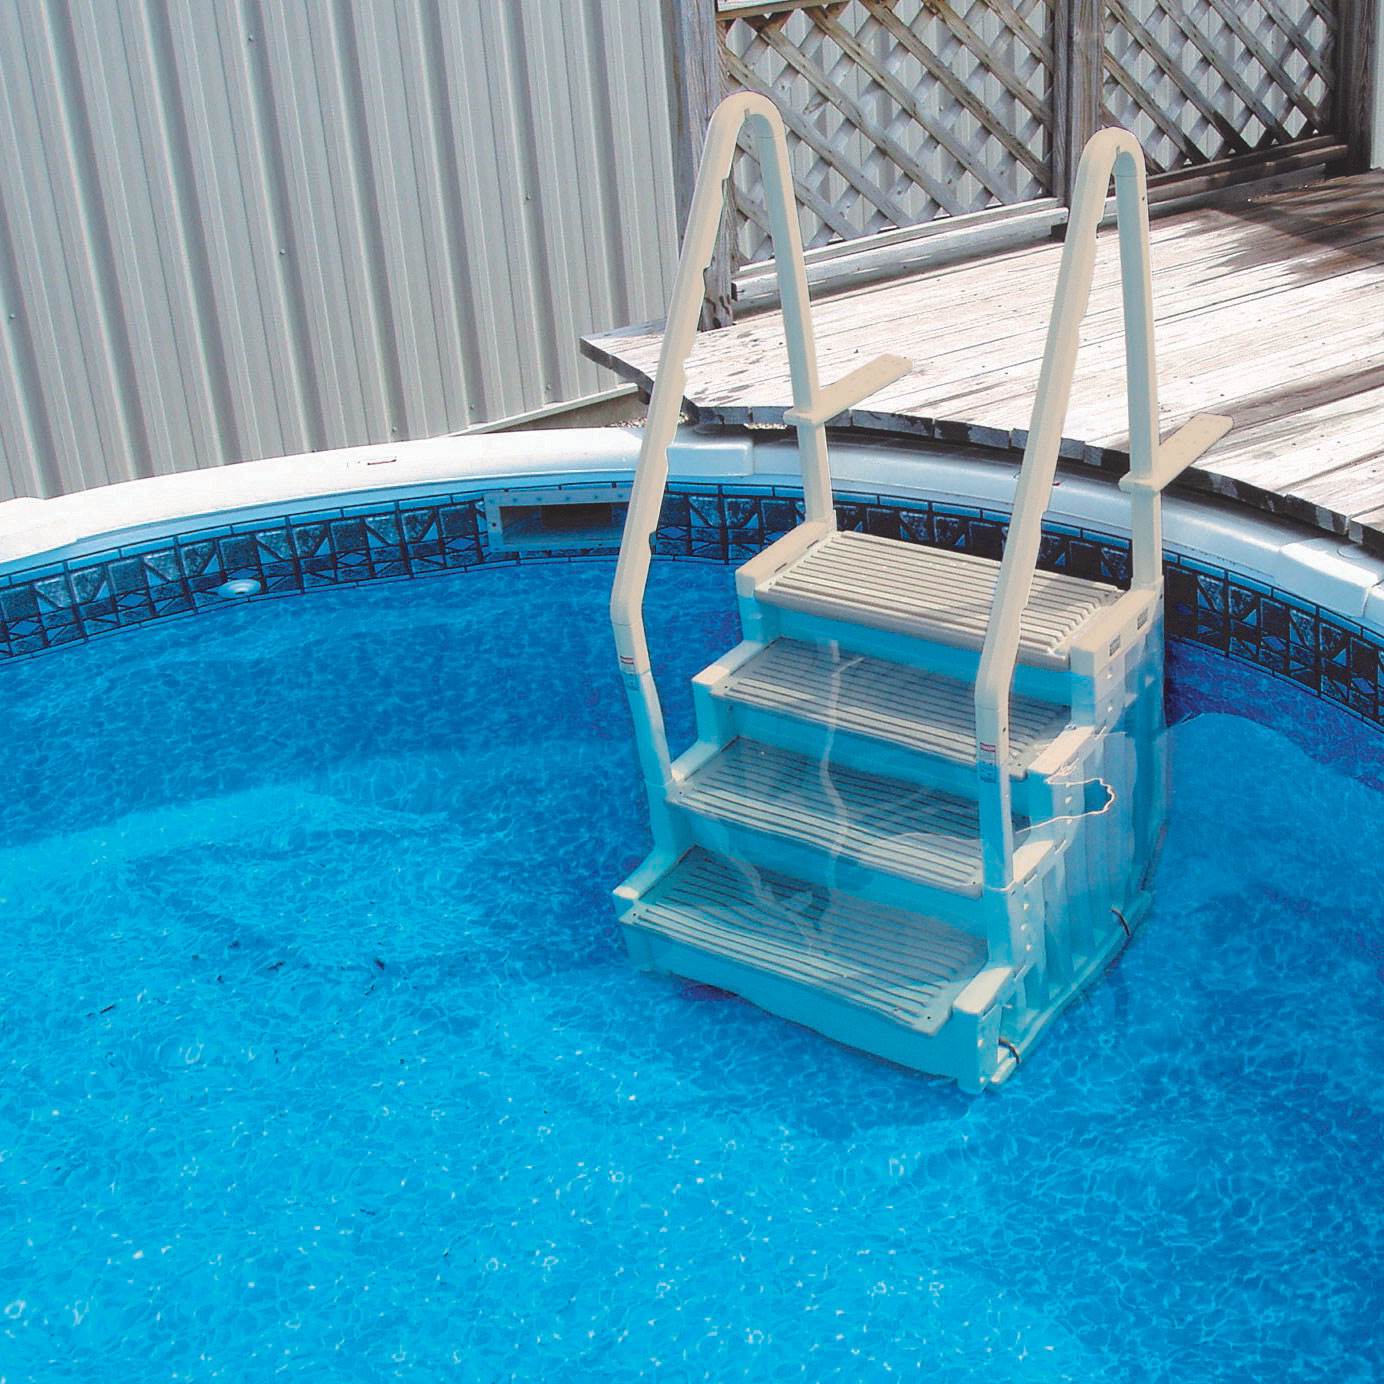 Creatice Above Ground Swimming Pool Ladder Parts for Living room